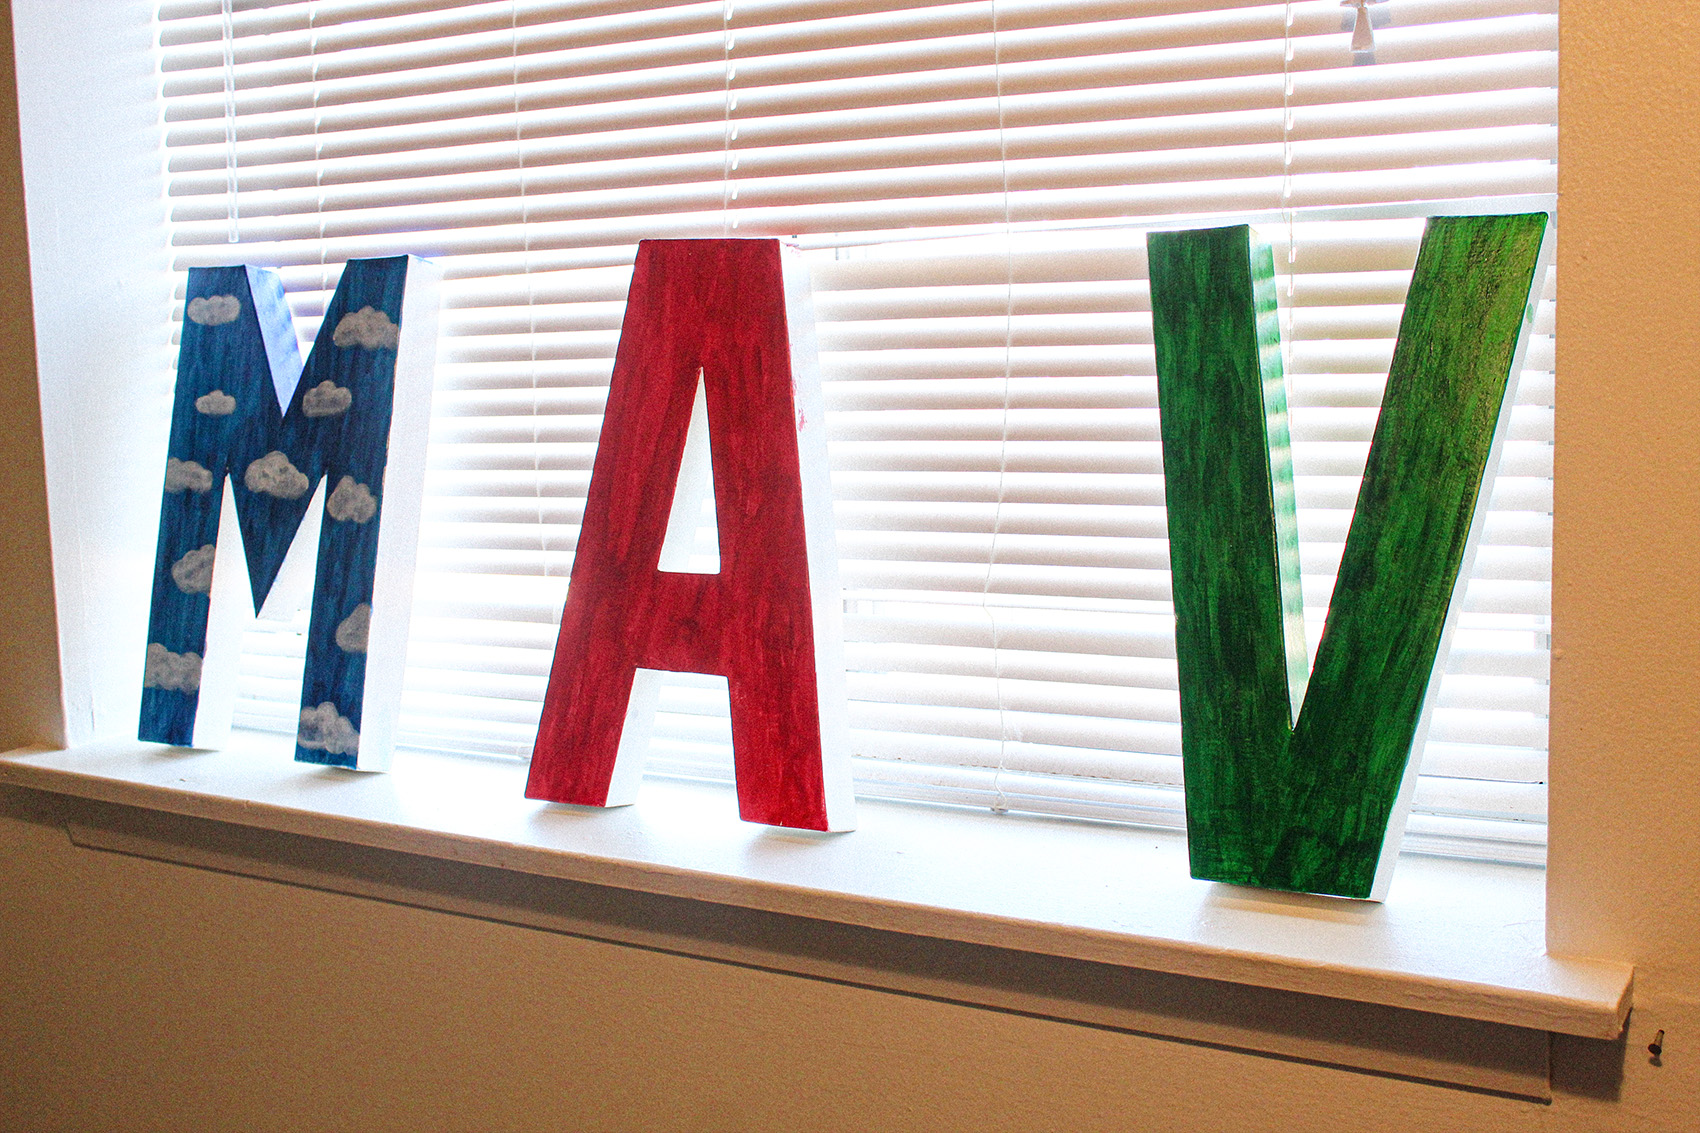 Letters (left to right) M (Blue) A (Red) and V (Green) lean against closed blinds in window.